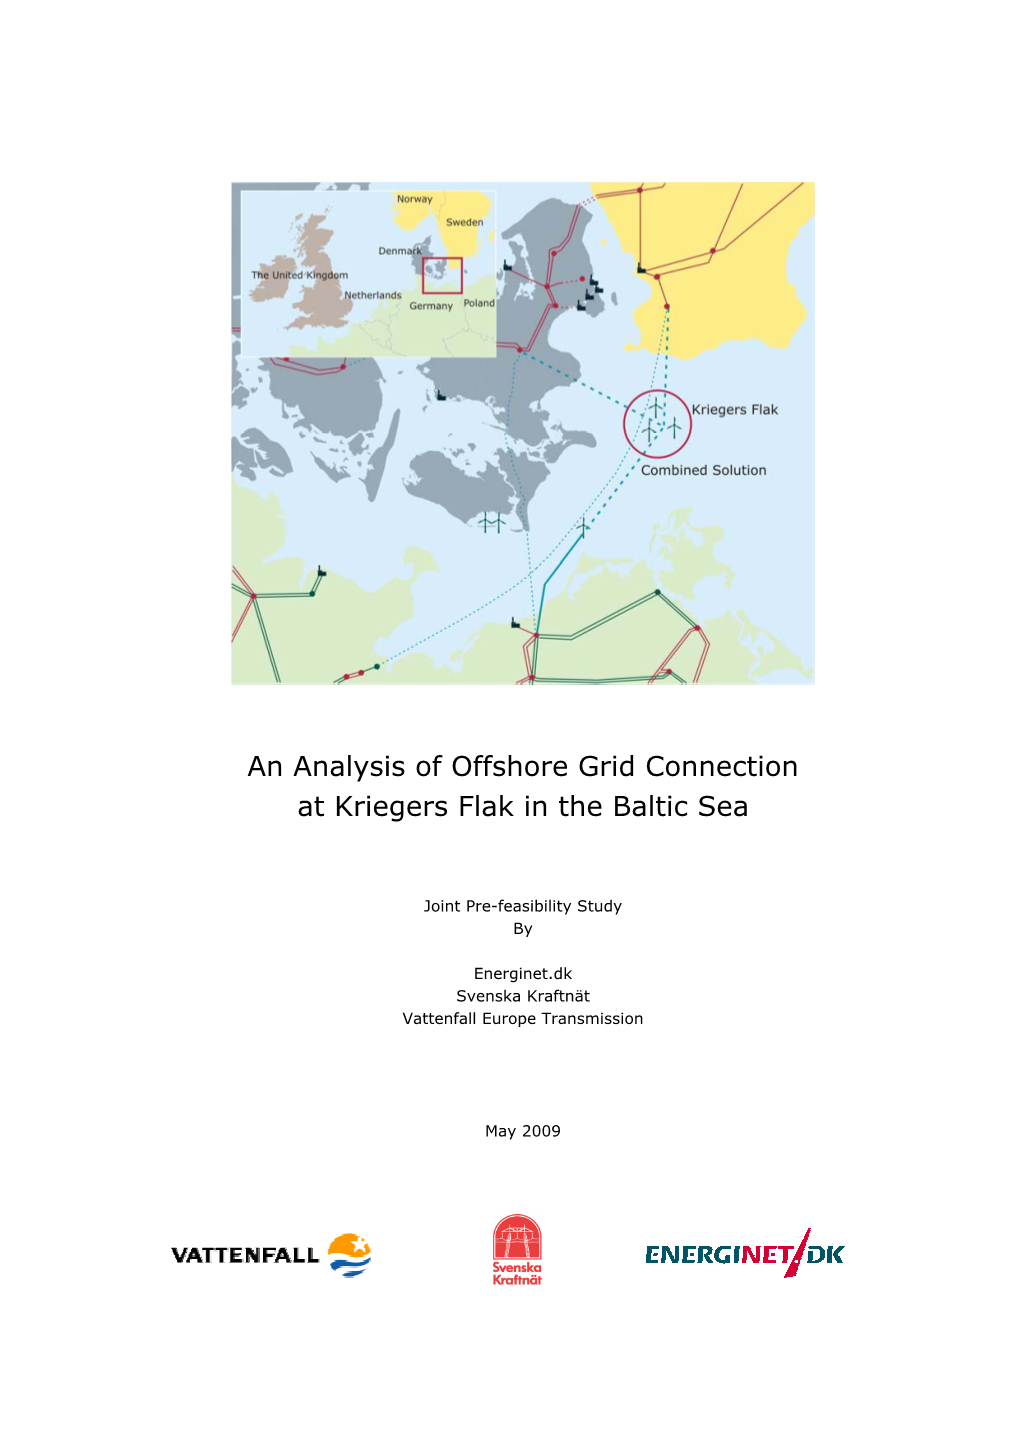 Pre-Feasibility Study of Offshore Grid Connection at Kriegers Flak